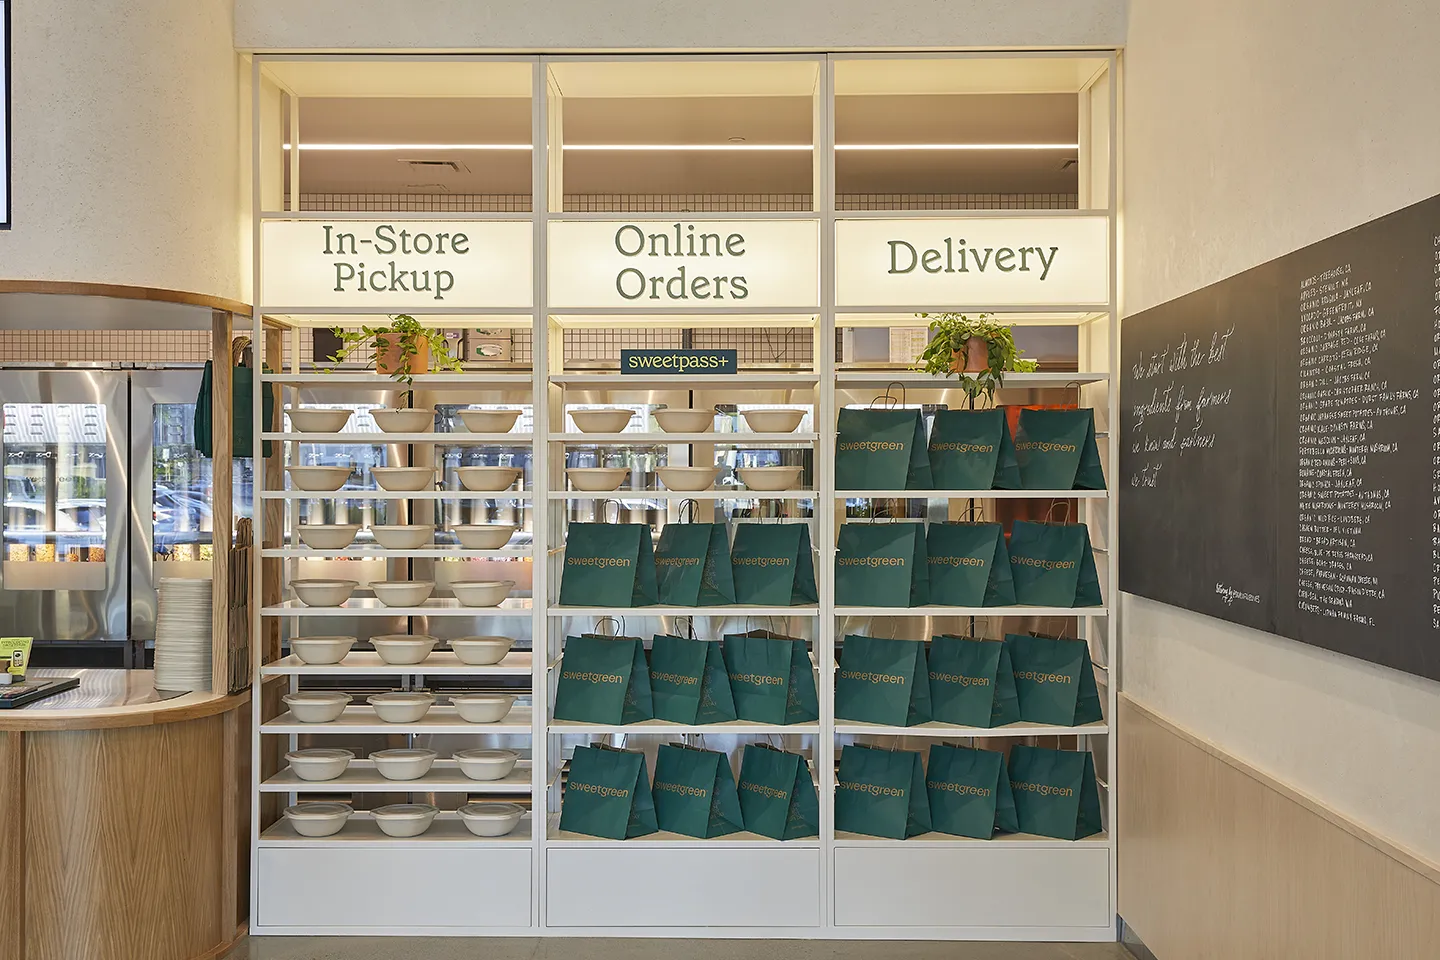 When the order is complete, customers may grab their order for in-store pickup, online, or delivery orders.